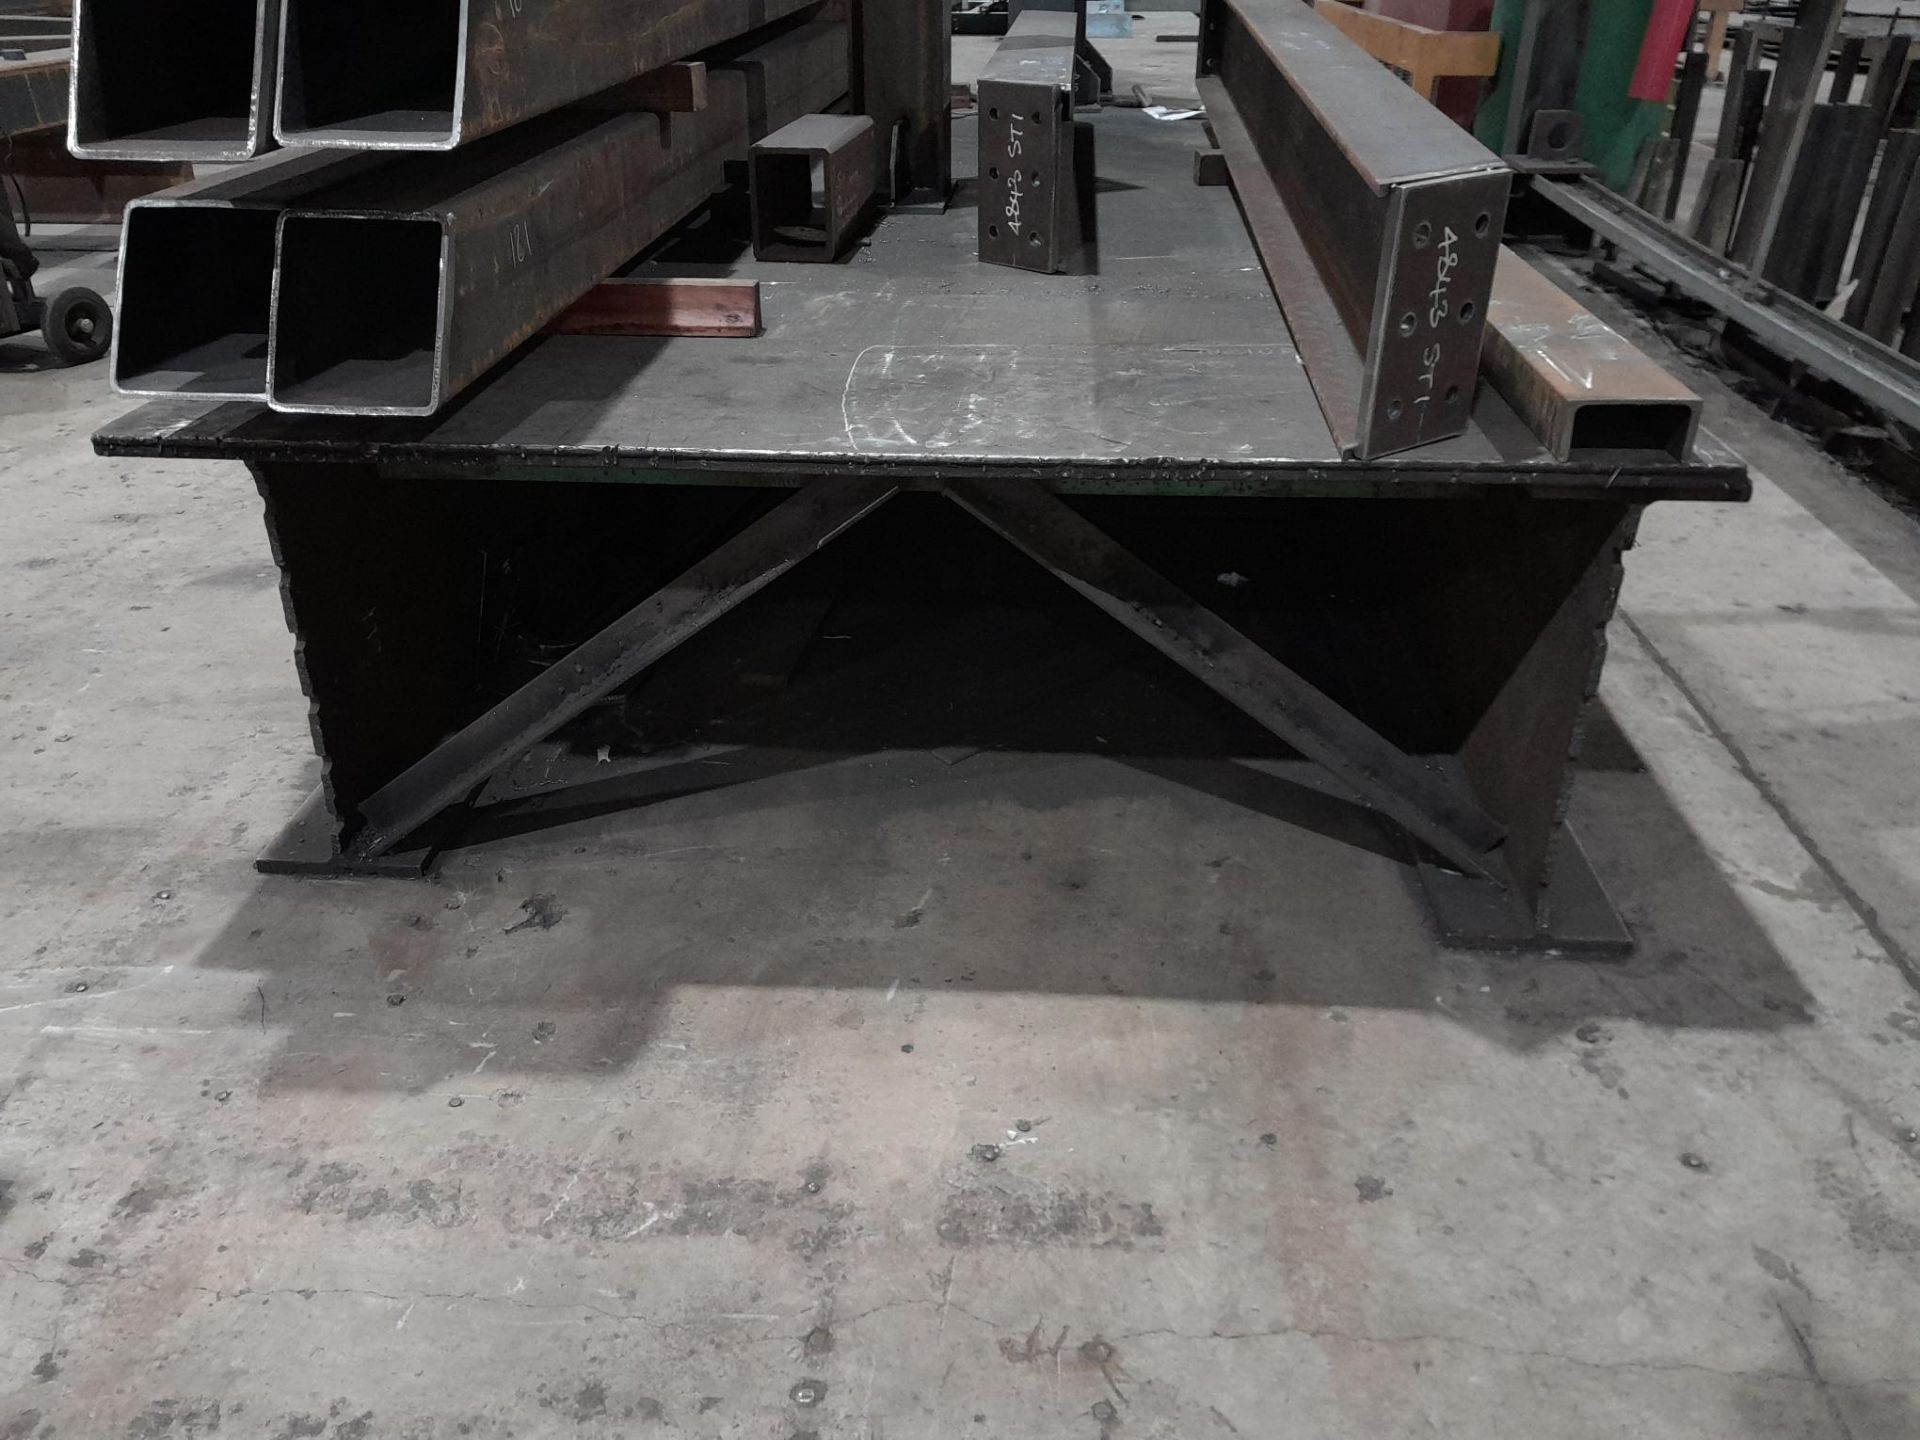 Very large fabricated work bench, approx 7m. Contents not included. - Image 3 of 3